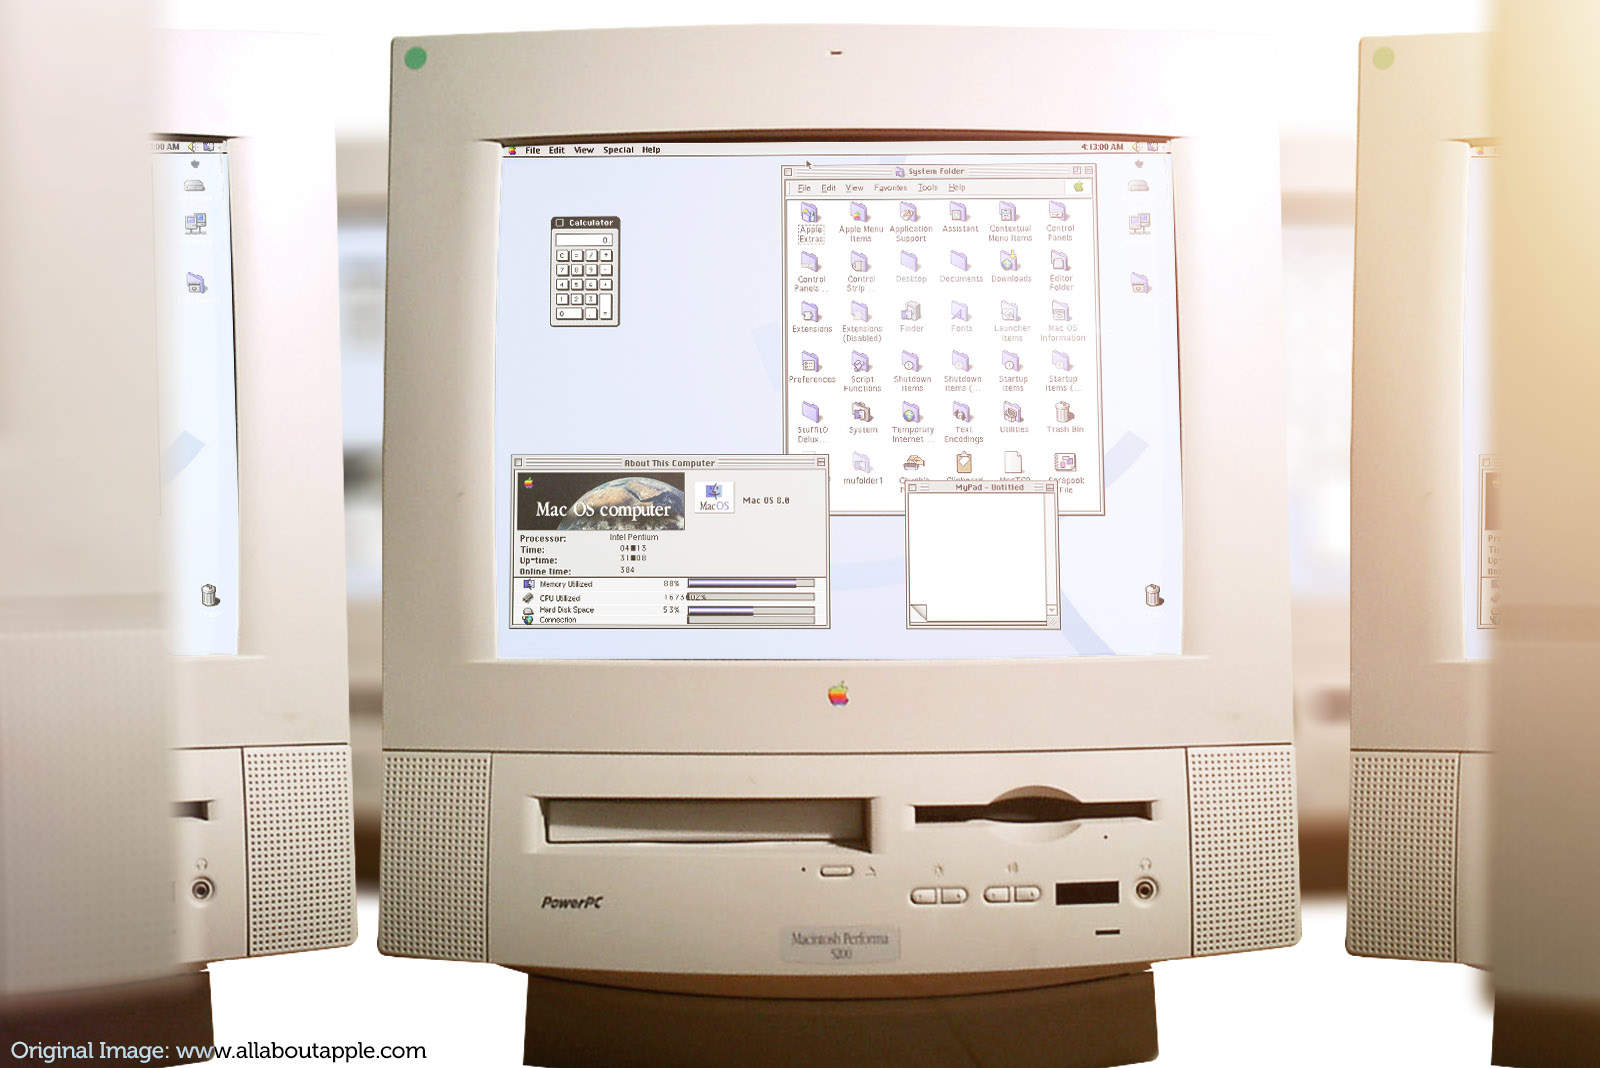 Mac OS 8 gave Apple a much-needed revenue boost.